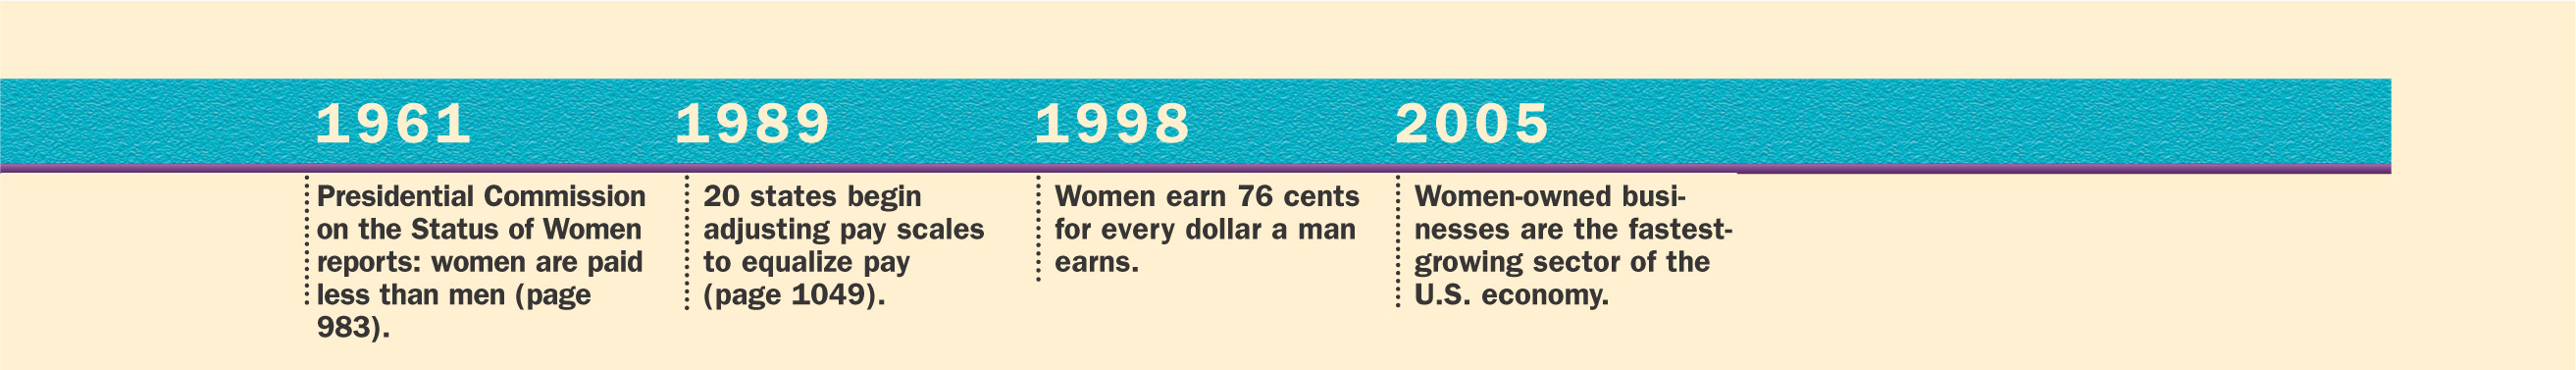 A timeline shows events involving women in the workforce in the U.S. from 1834 to 2005.